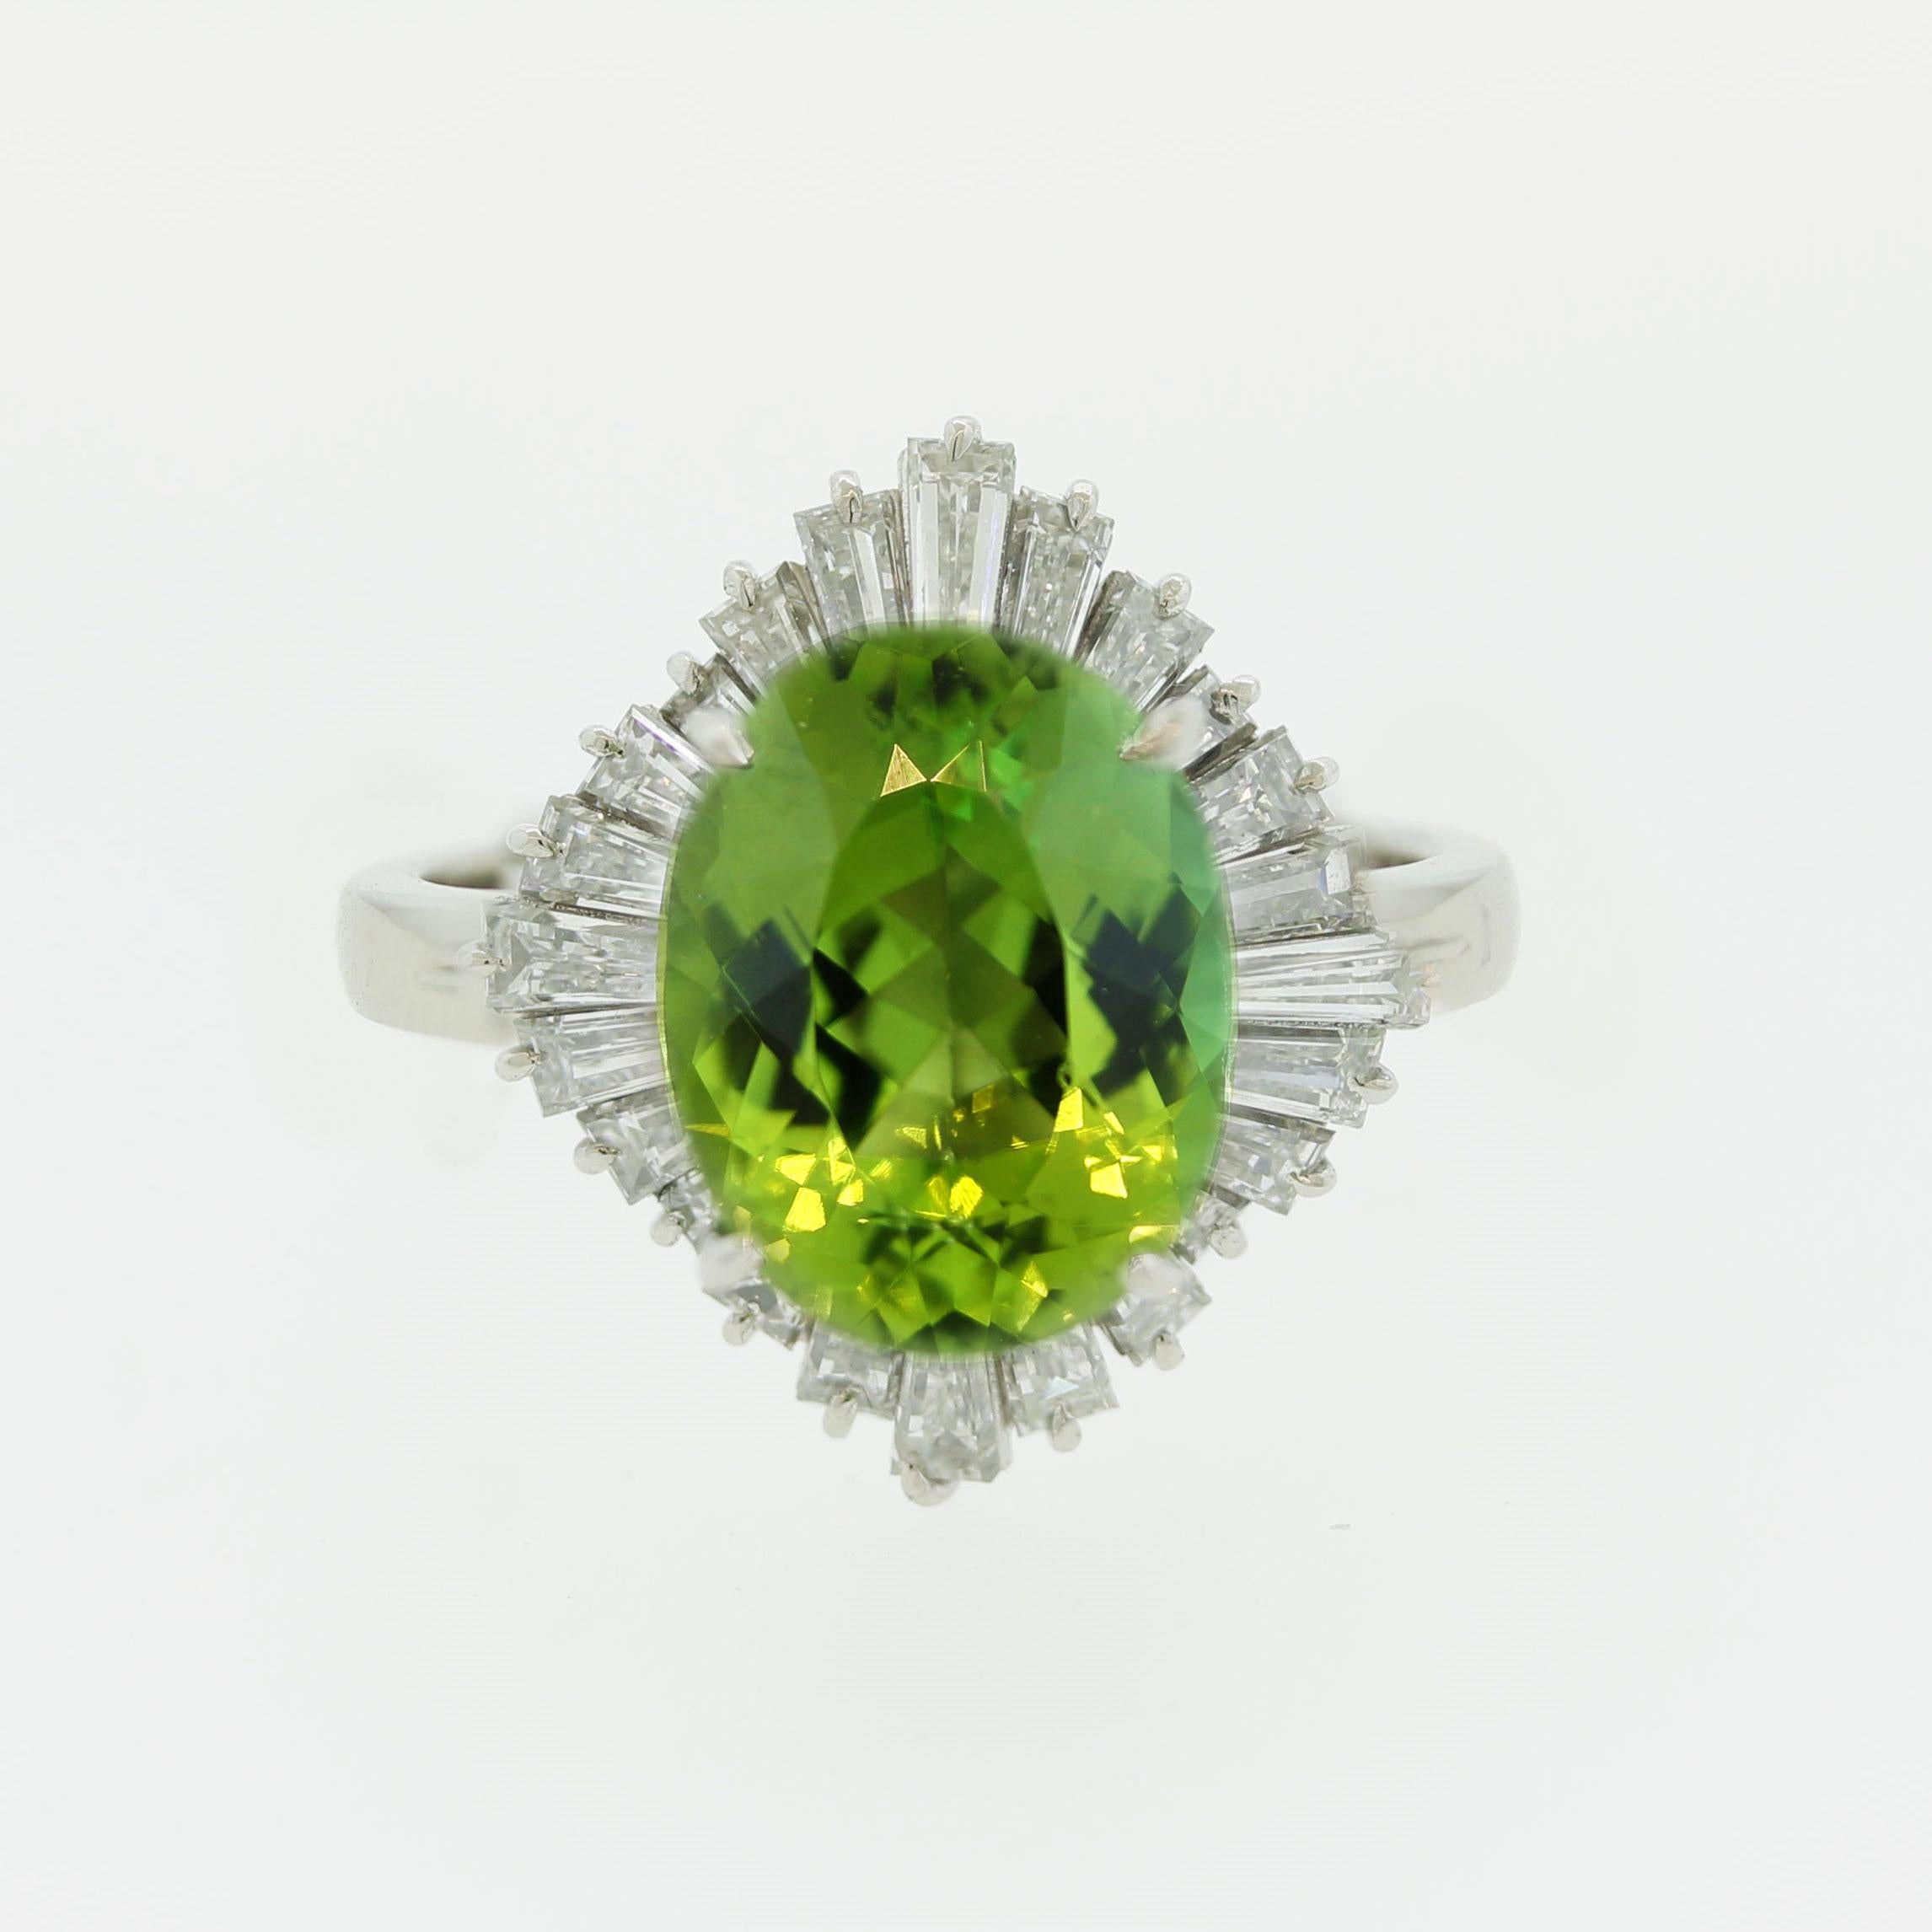 A vibrant and vivid green colored tourmaline weighing 4.10 carats takes center stage. It has a lovely oval-shape and is accented by 1.48 carats of baguette-cut diamonds set around it in a ballerina style. Hand-fabricated in platinum and ready to be